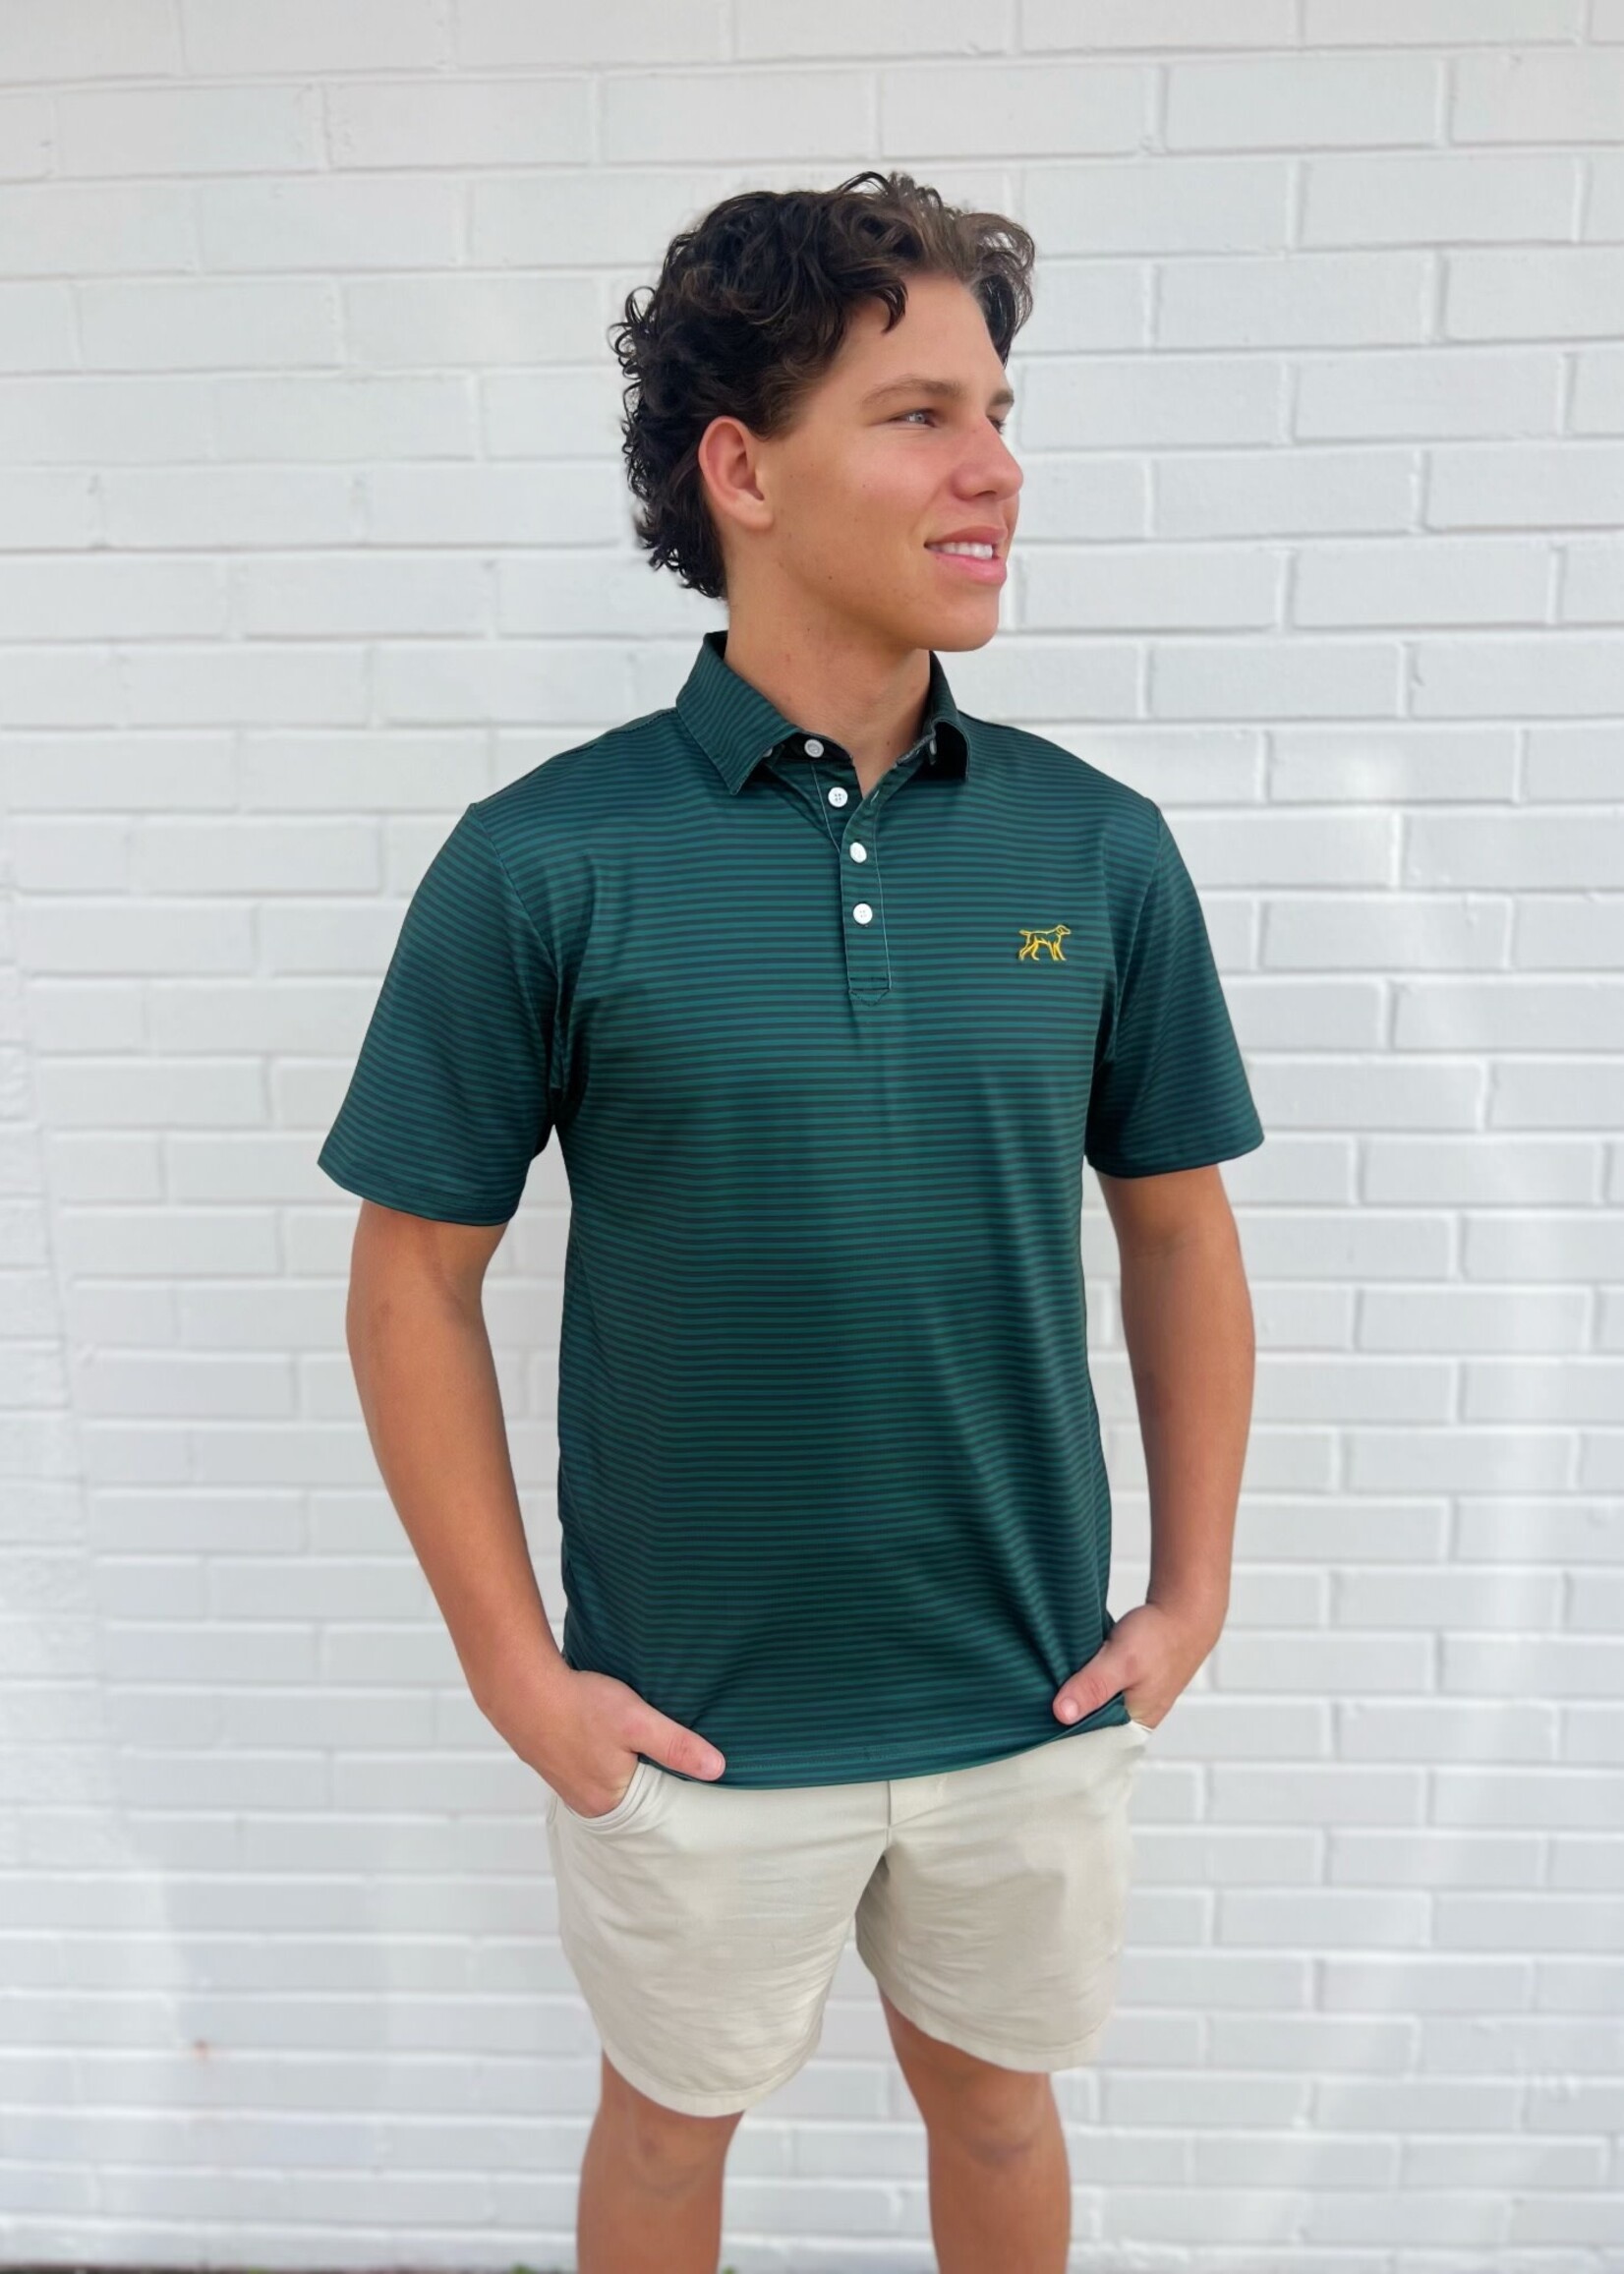 Bloom and Company Men's Green Performance Polo